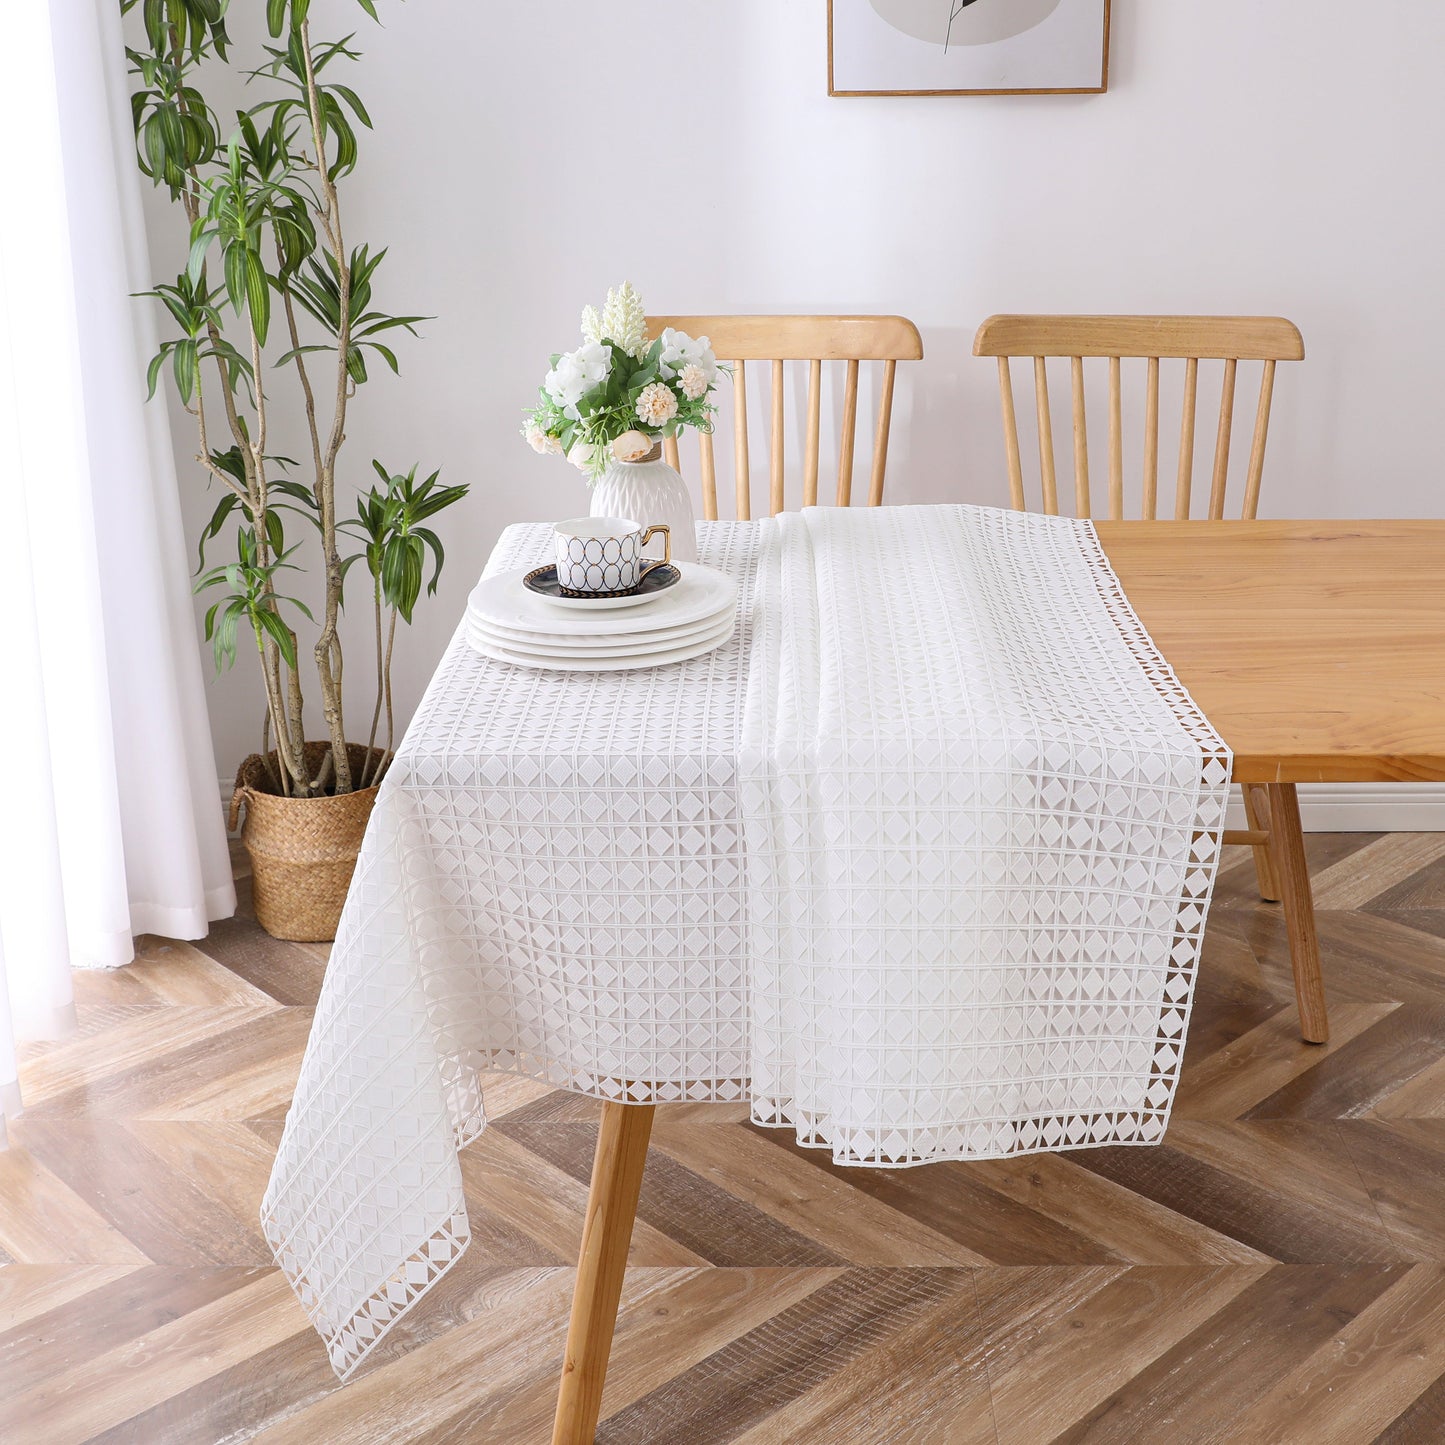 Tablecloth Lace Unlined #TC1726UL